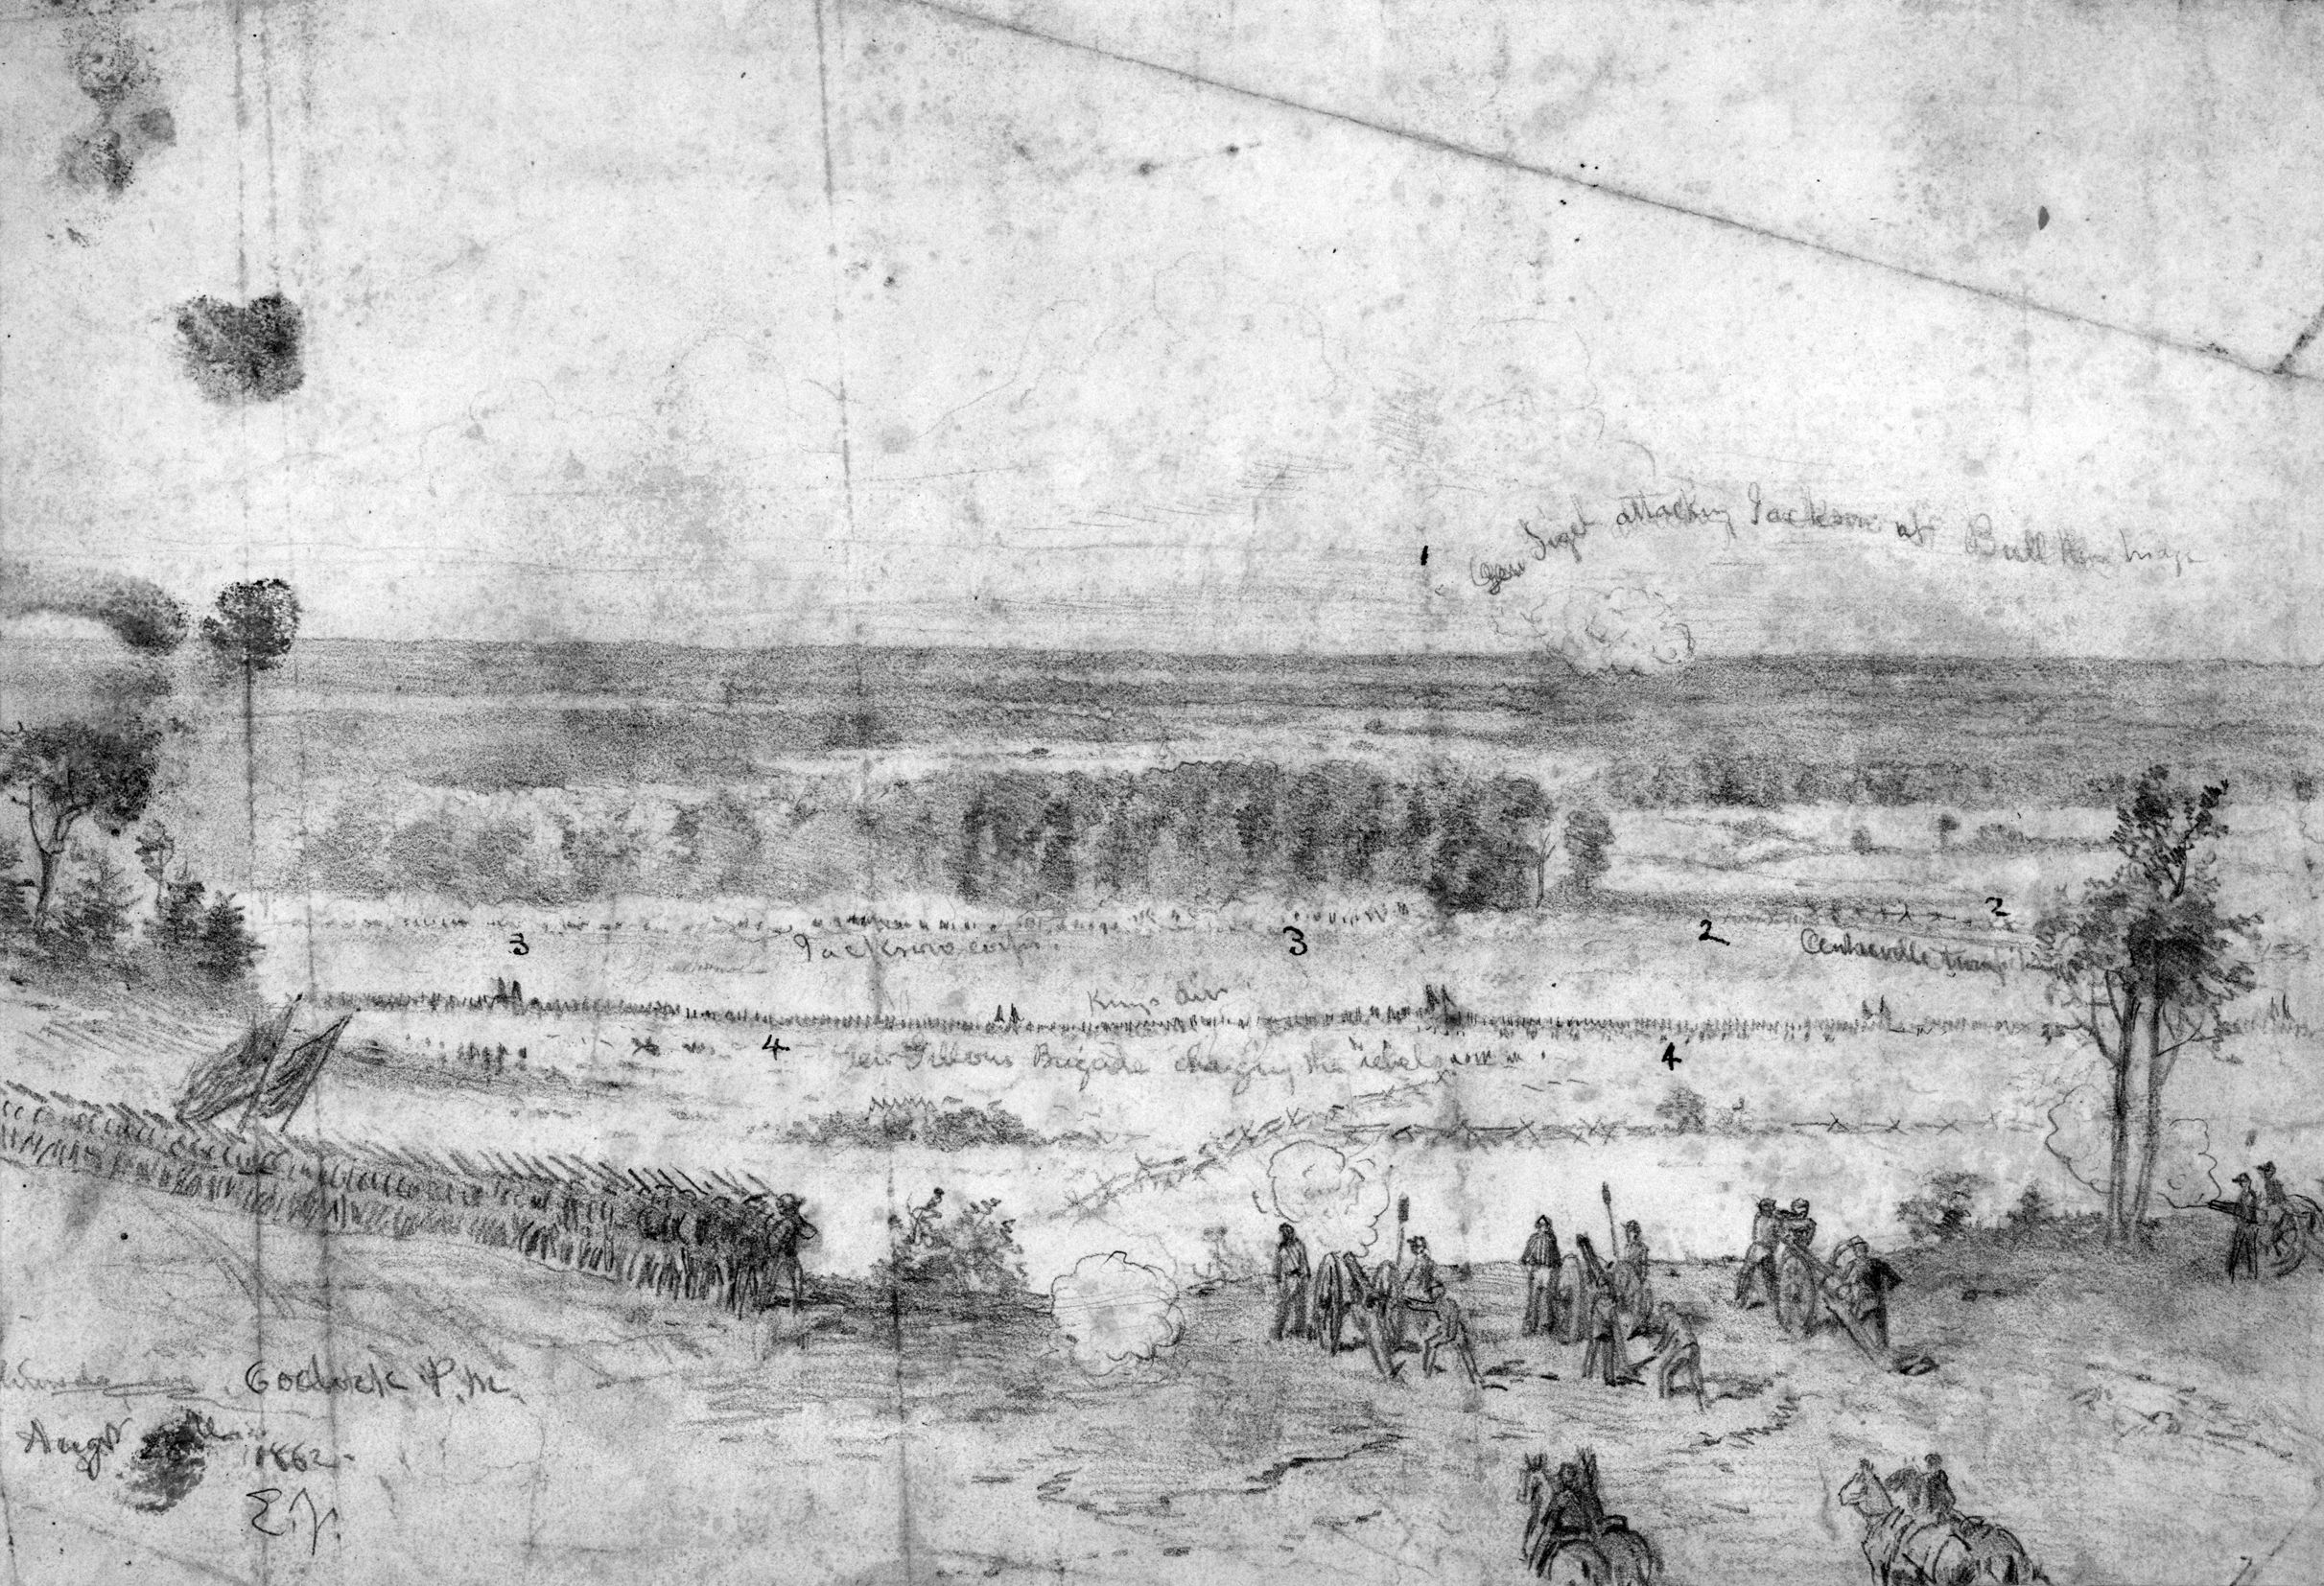 Battlefield artist Edwin Forbes sketched Brig. Gen. Rufus King’s division, in the middle distance, attacking Stonewall Jackson’s left flank. The view is looking south across the Warrenton Turnpike.